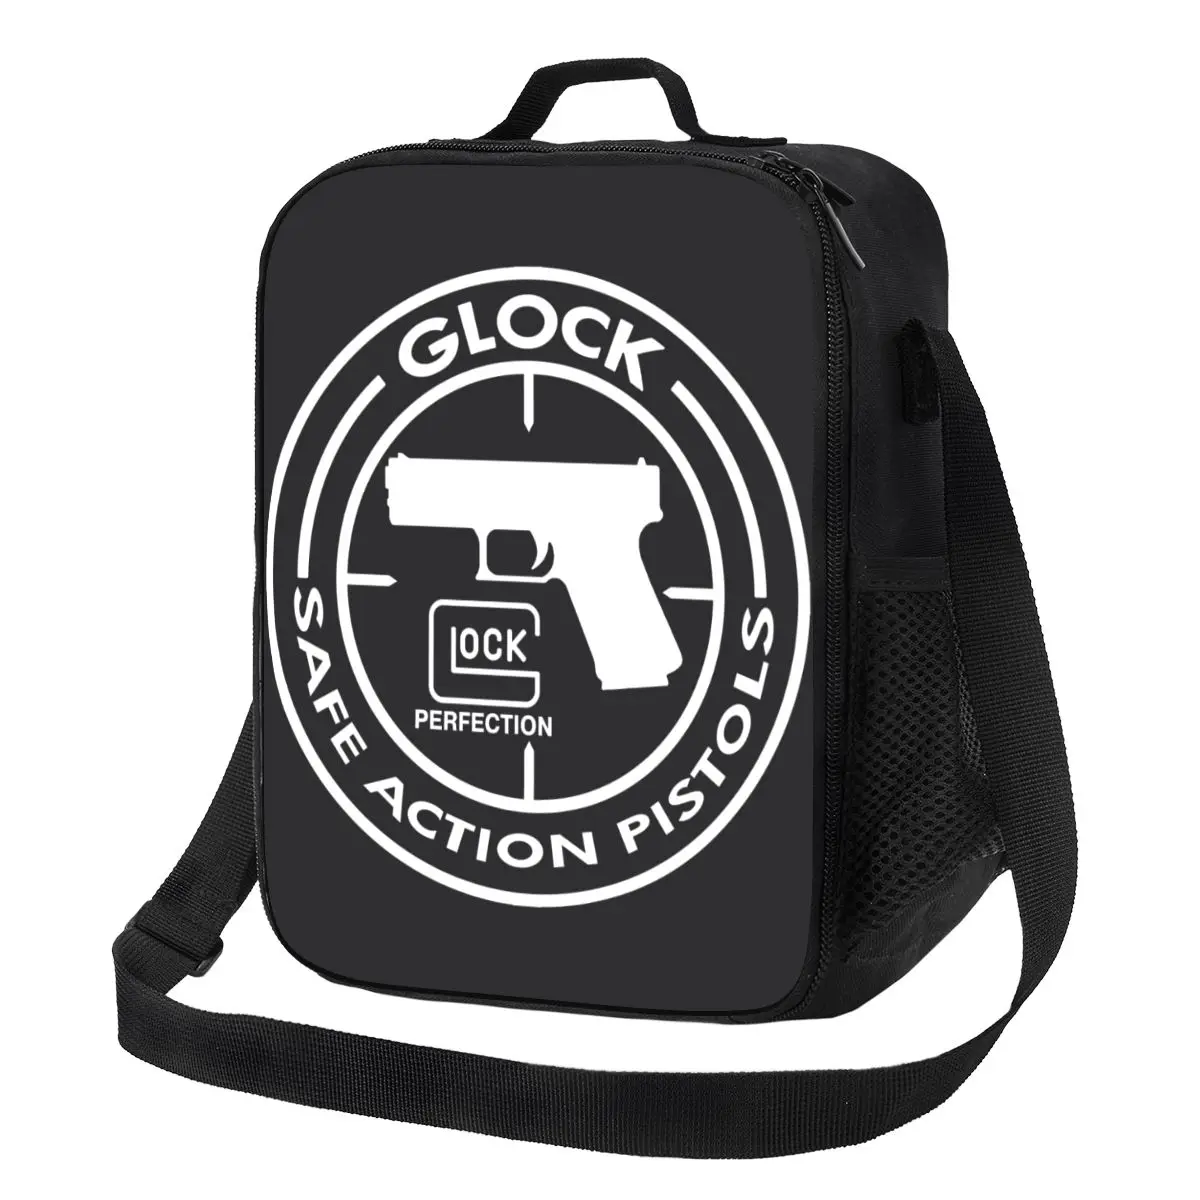 

Glock Insulated Lunch Bags for Women USA Handgun Pistol Logo Resuable Thermal Cooler Food Lunch Box Outdoor Camping Travel